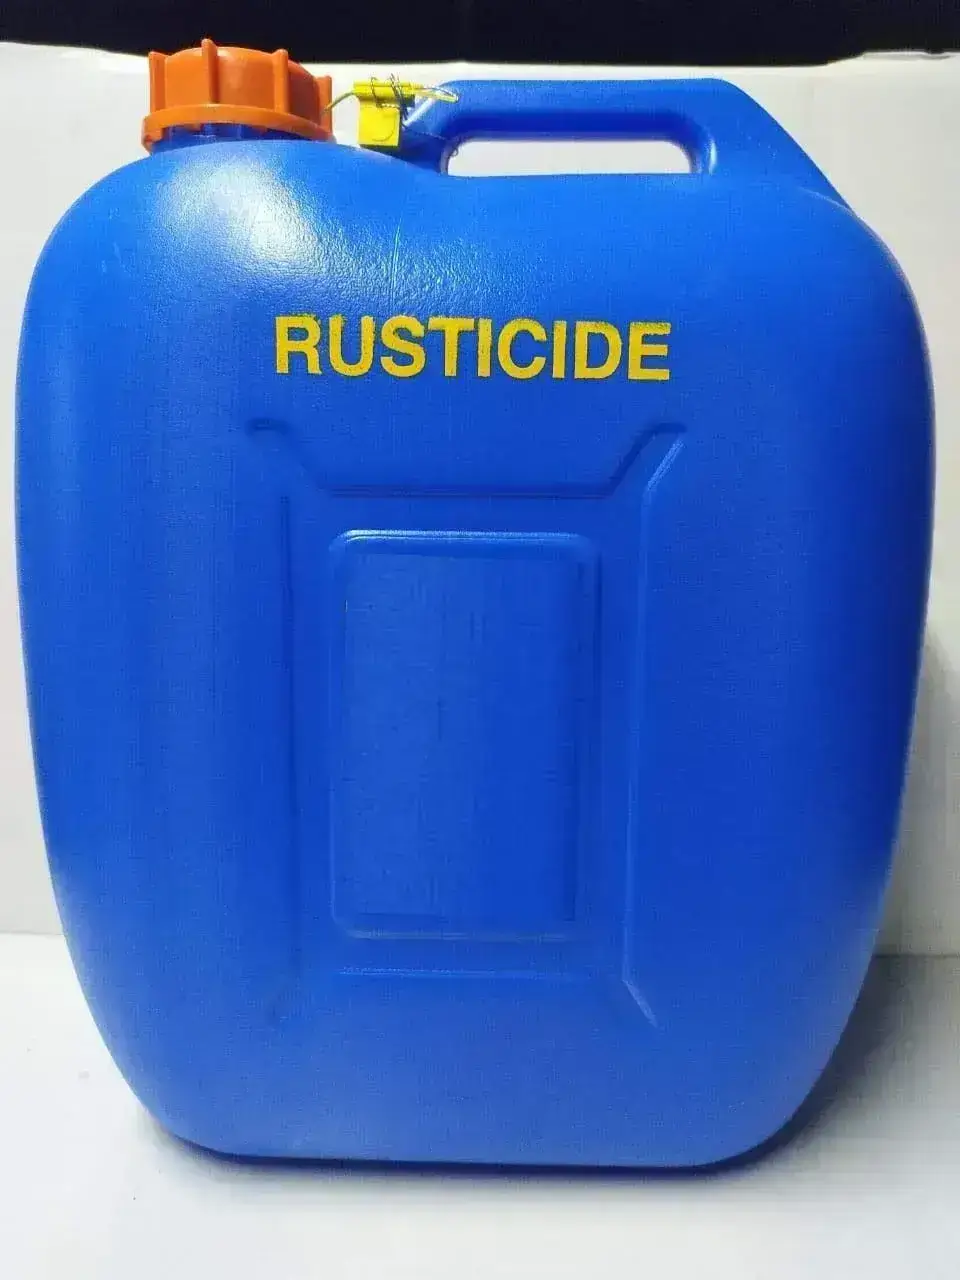 sunanda-speciality-coatings-pvt-ltd-product-corrosion-protection-rusticide-1